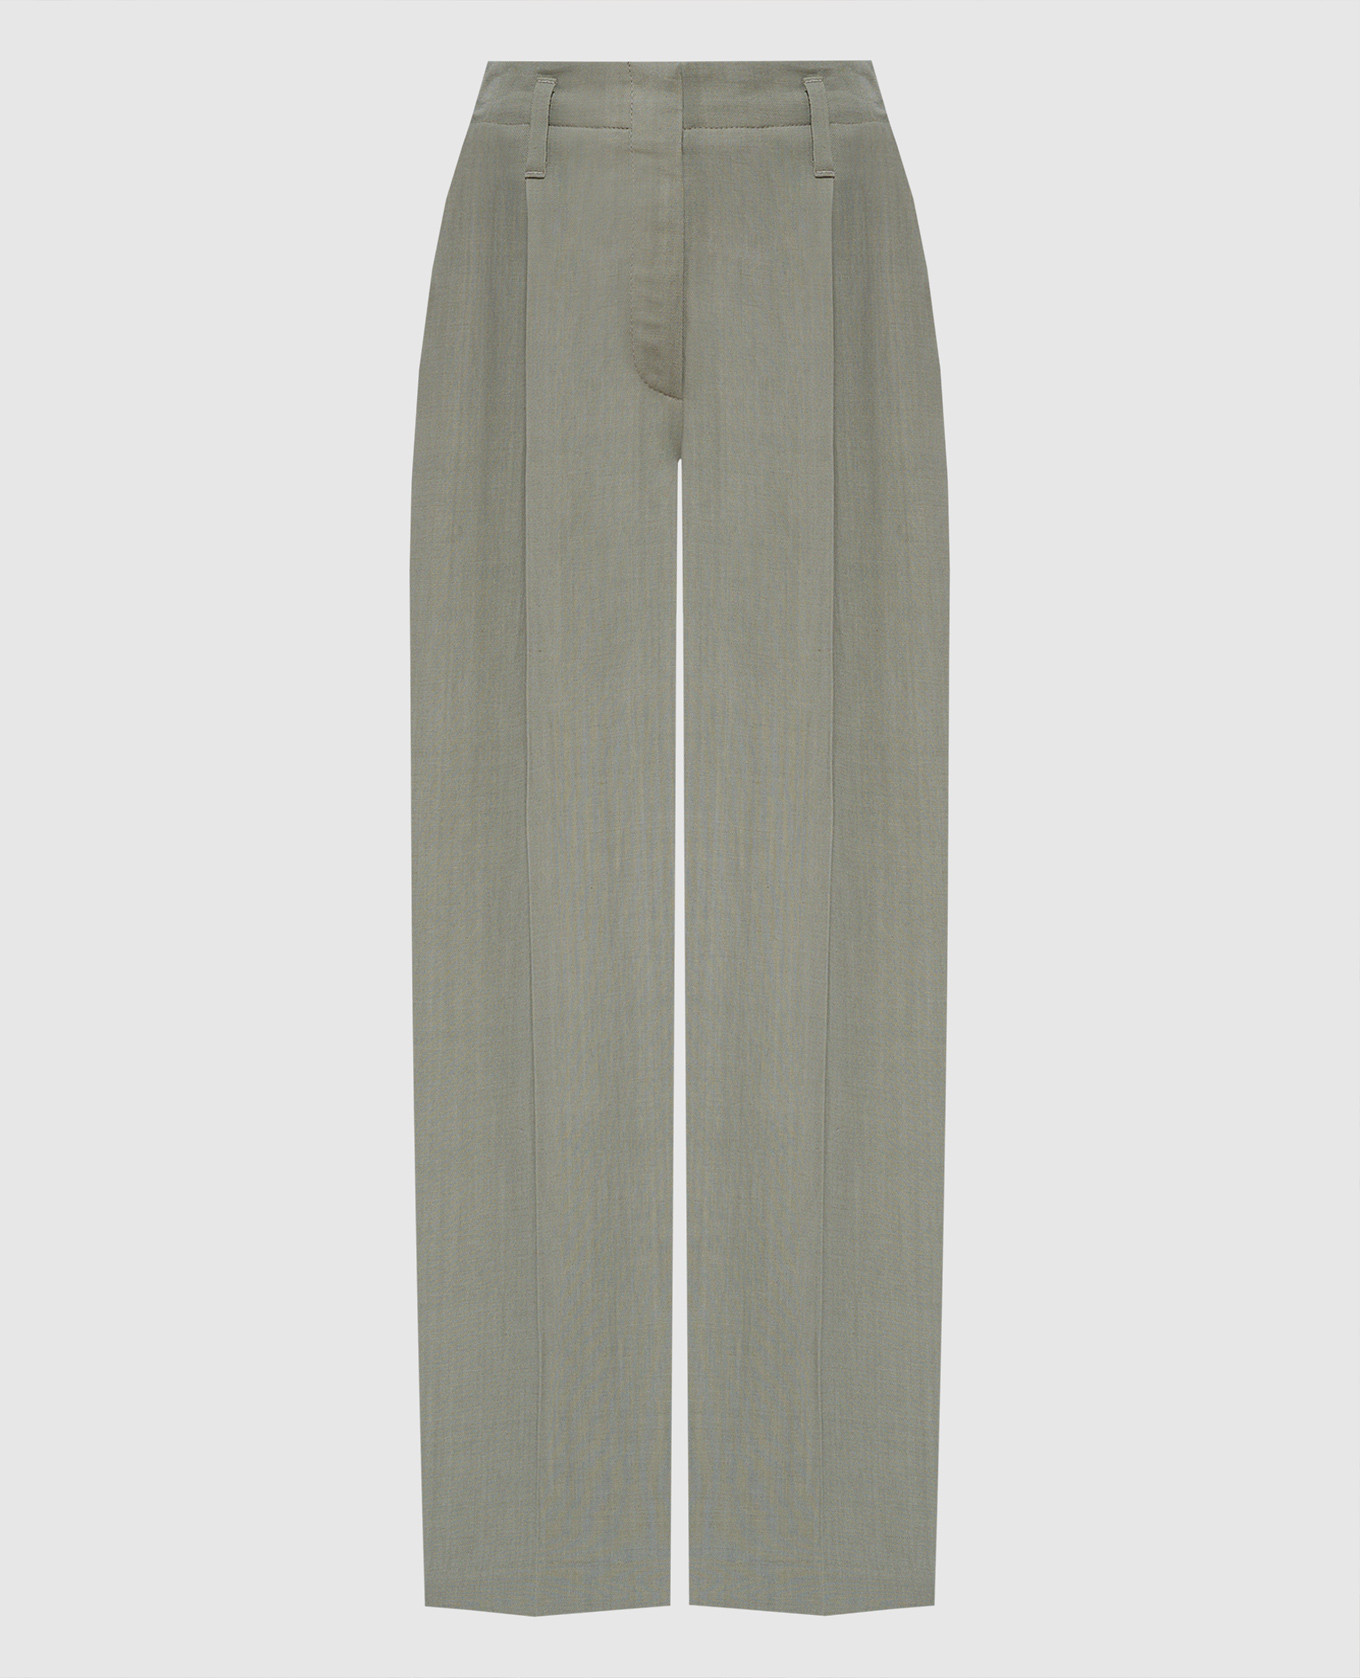 Gray pants with linen